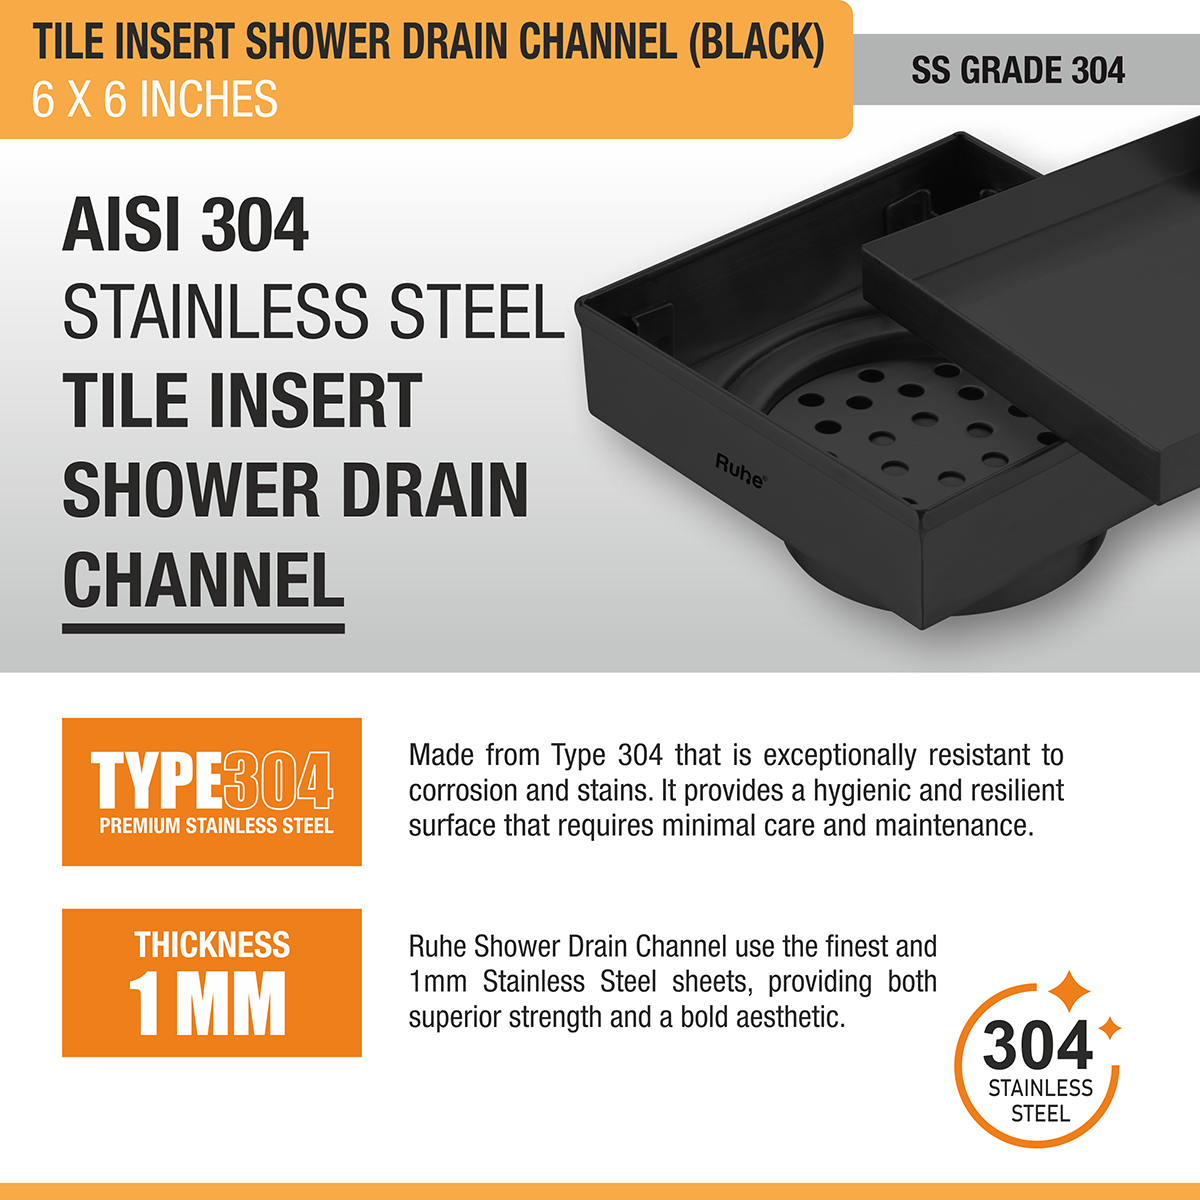 Tile Insert Shower Drain Channel (6 x 6 Inches) Black PVD Coated stainless steel